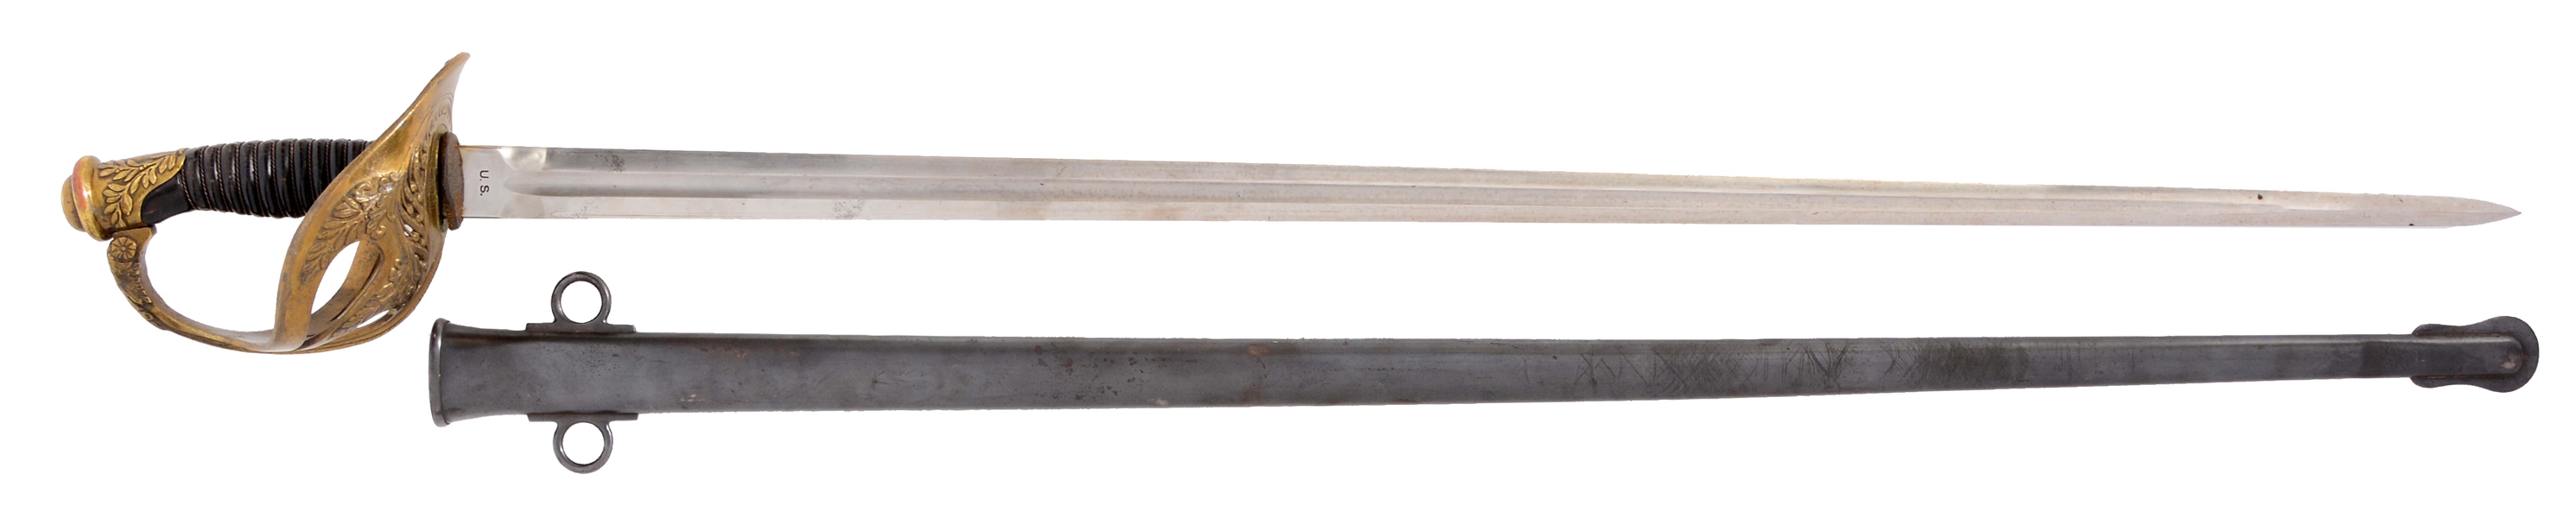 FRENCH HILTED PATTON SABER WITH U.S. BLADE DATED 1919.